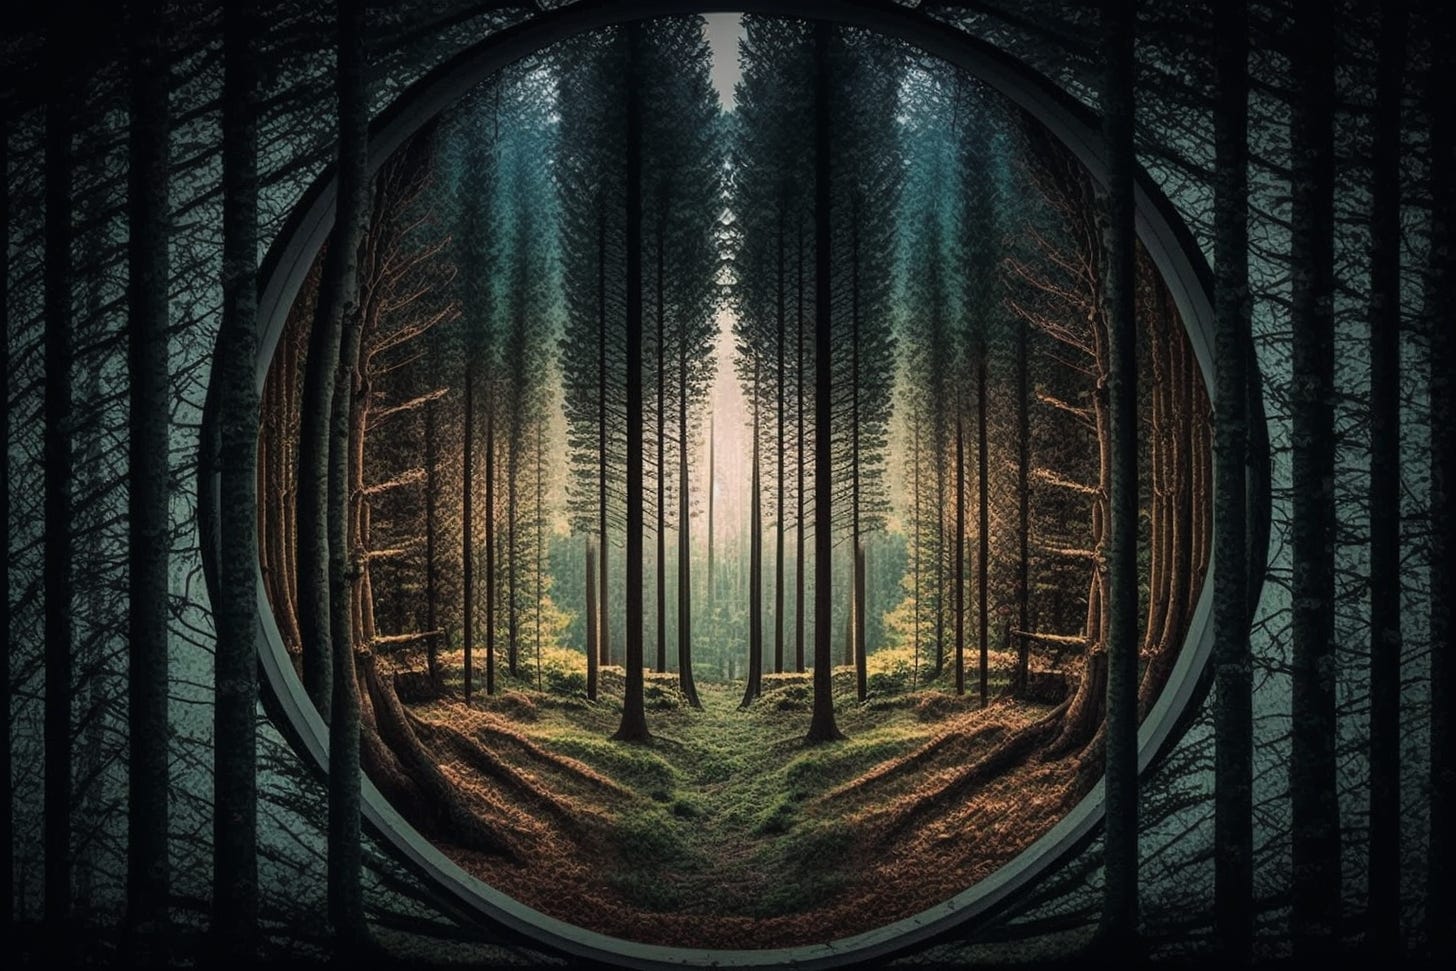 a forest with a zoomed out lens like an eye in the middle enabling the viewer to see more of the tree